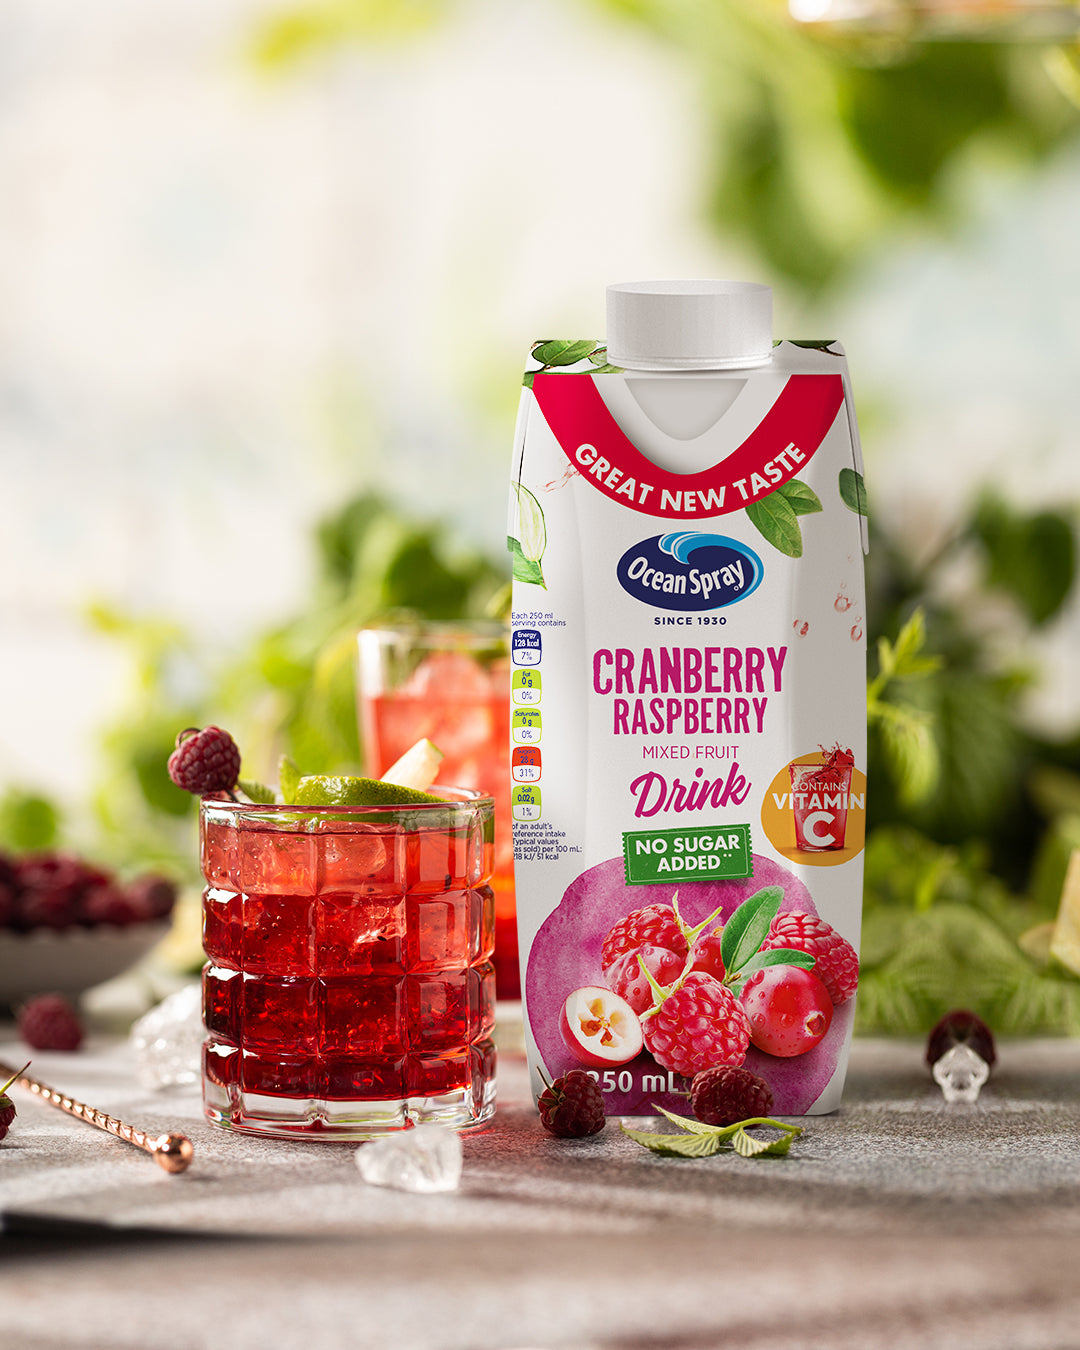 Ocean Spray Cranberry Raspberry Mixed Fruit Drink No Sugar Added, 250ml, Pack of 6